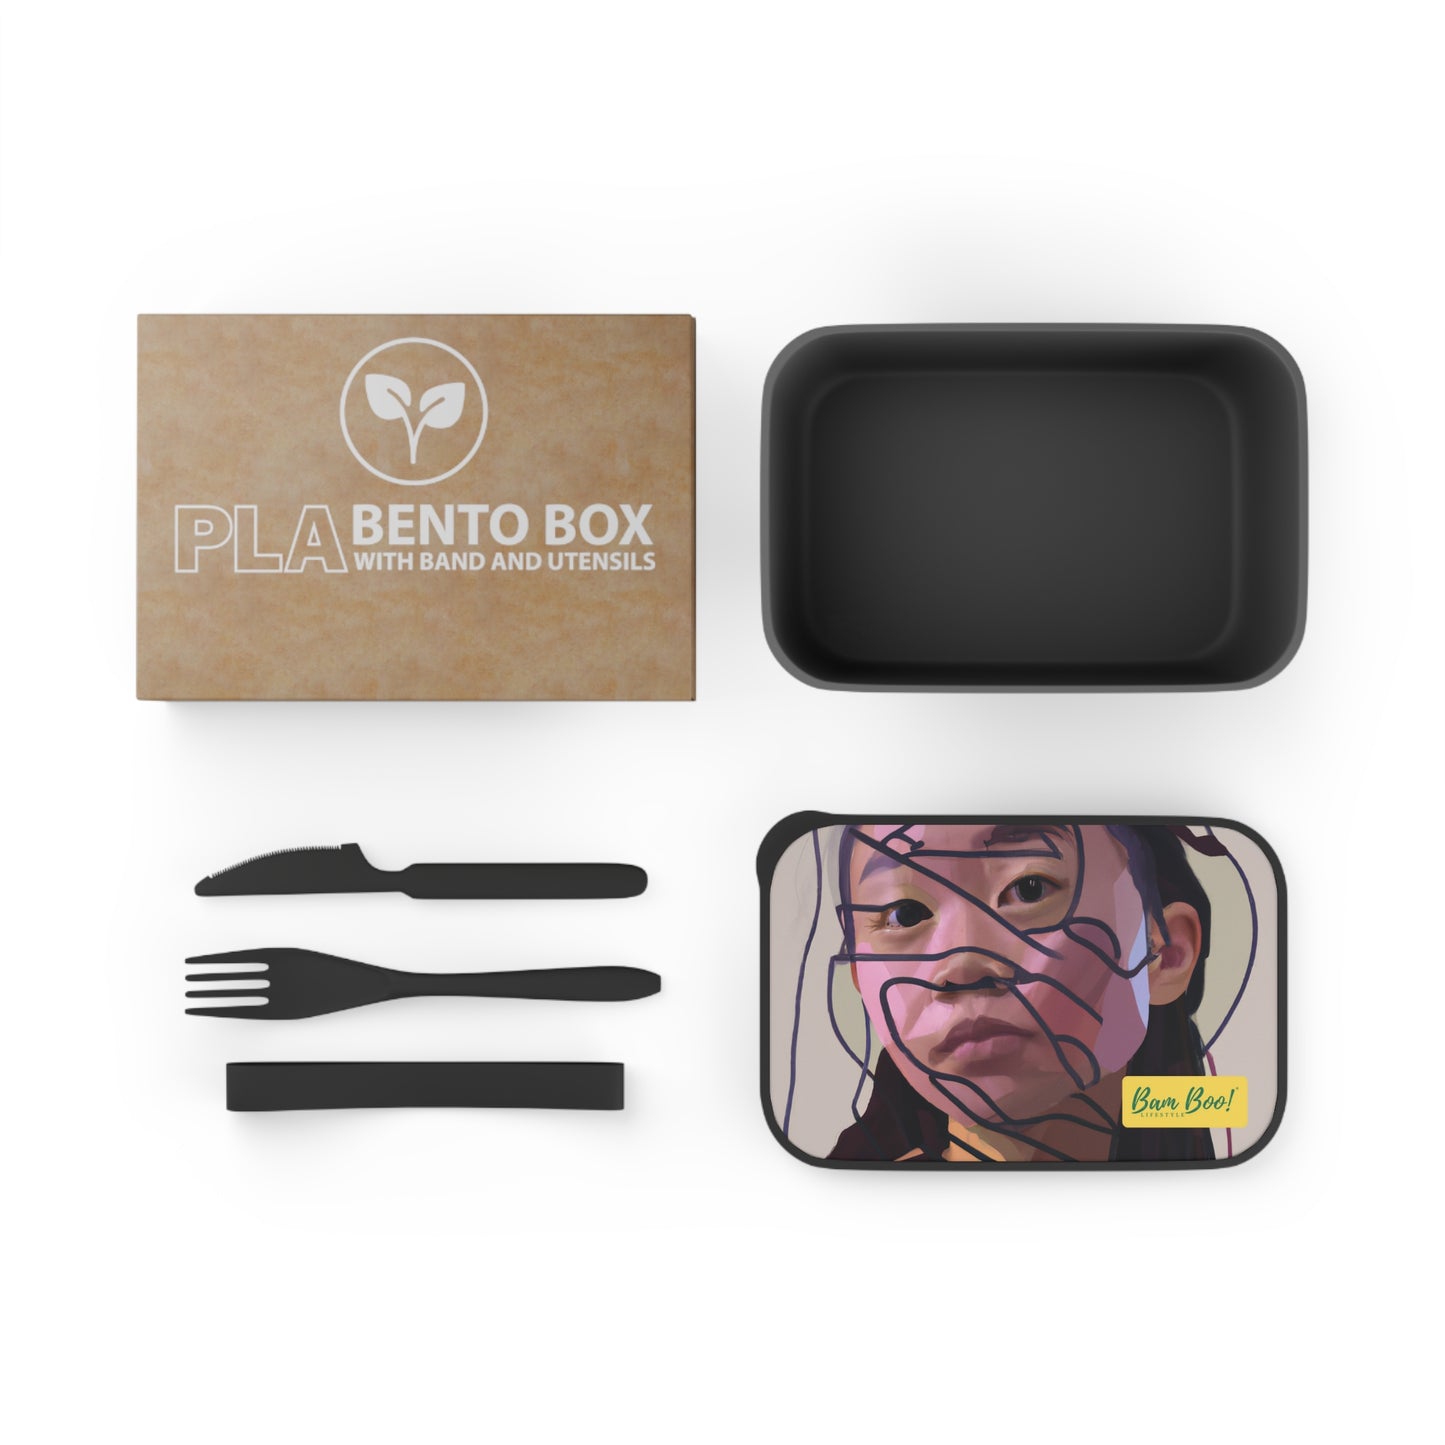 "The Modern Me: Combining Art and Technology." - Bam Boo! Lifestyle Eco-friendly PLA Bento Box with Band and Utensils